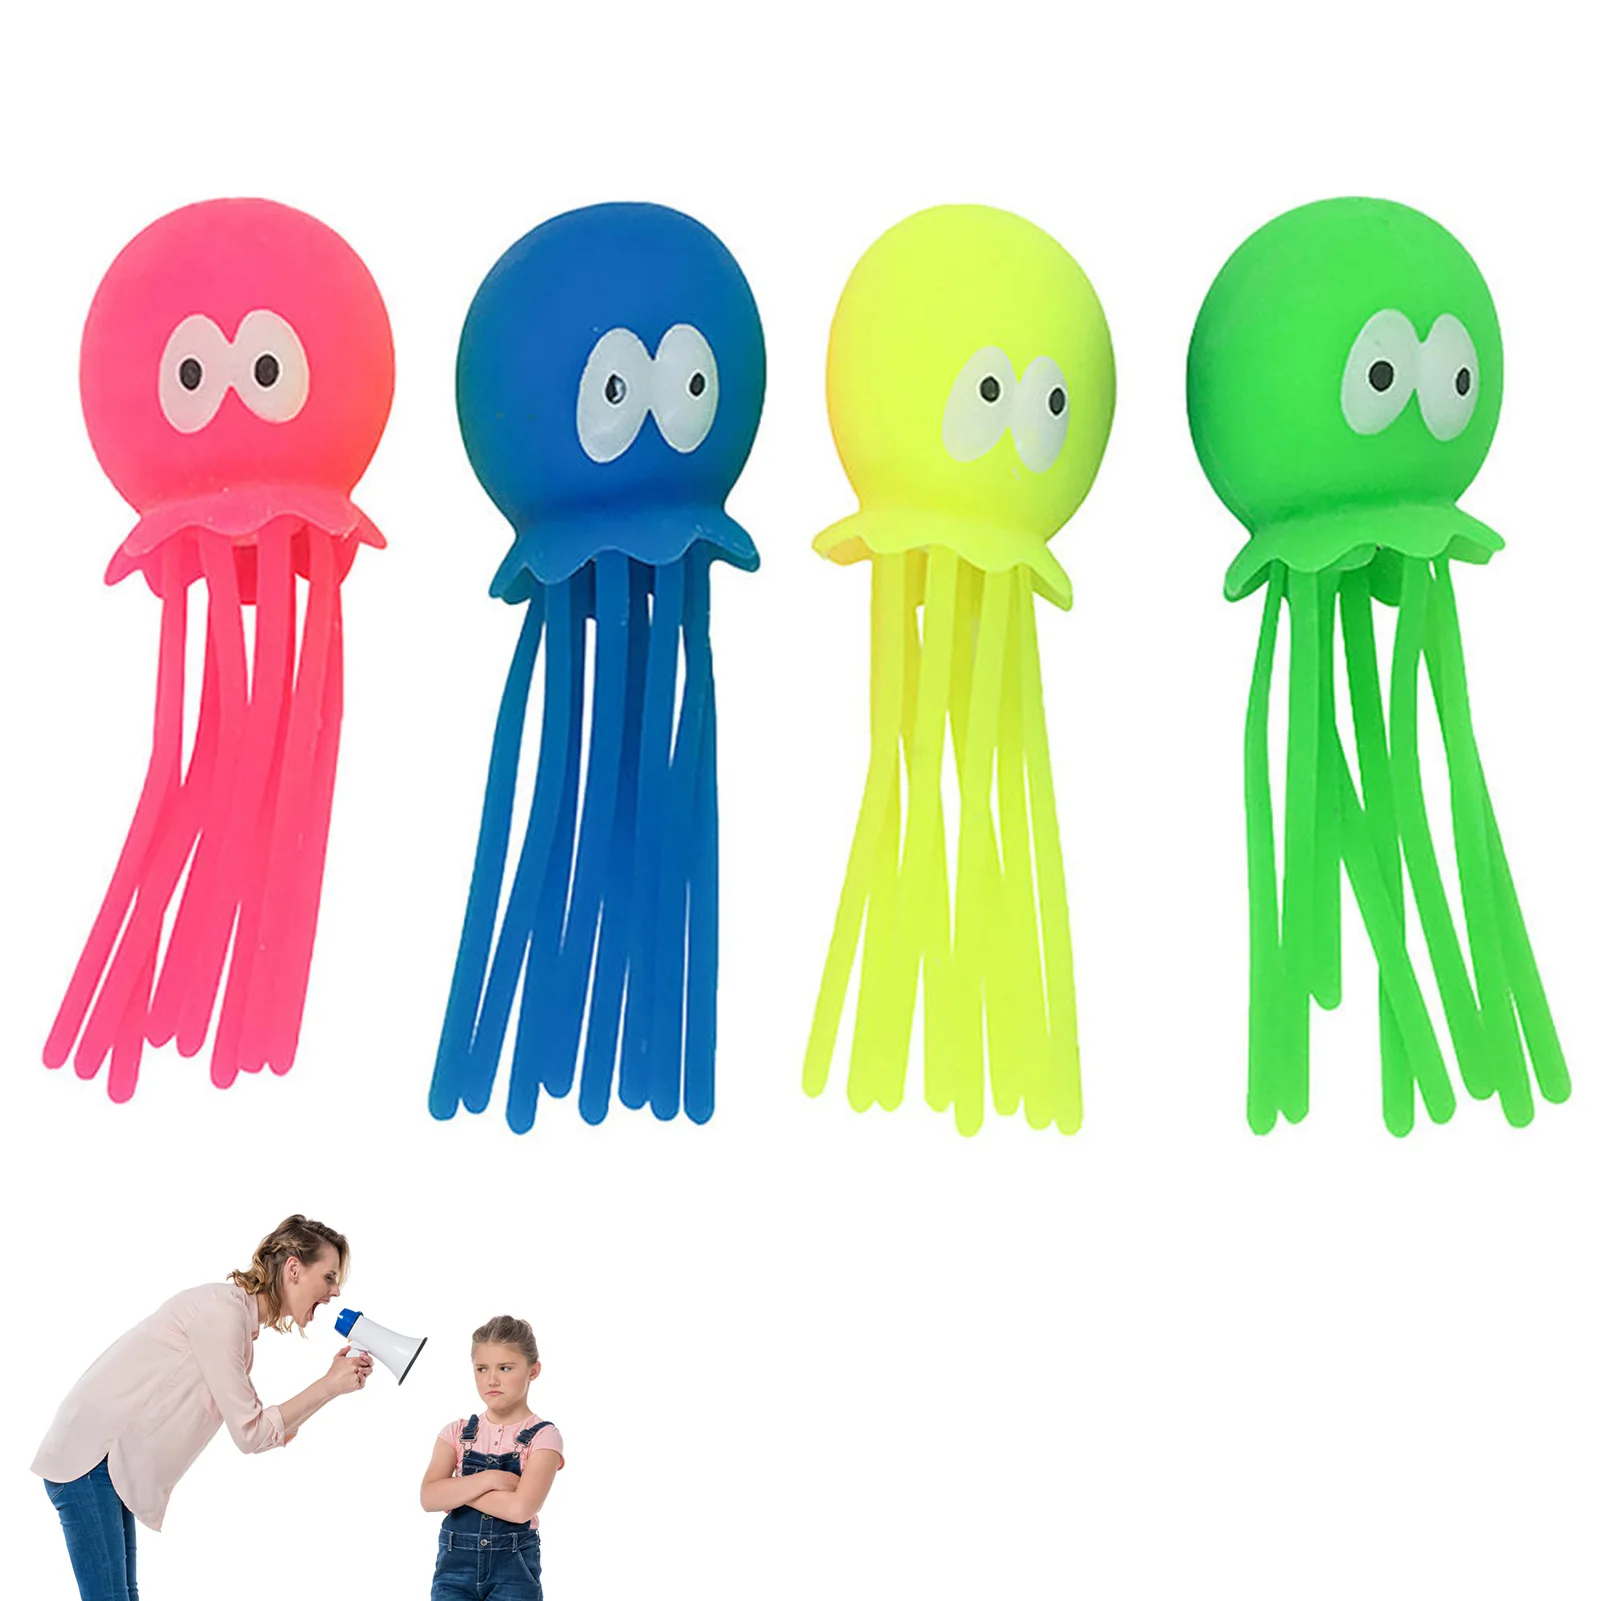 

Jellyfish Toy Squishy Stress Balls Mini Soft Jellyfish Squeeze Stress Reliever Balls Birthday Toy Gifts For Children Adults Part